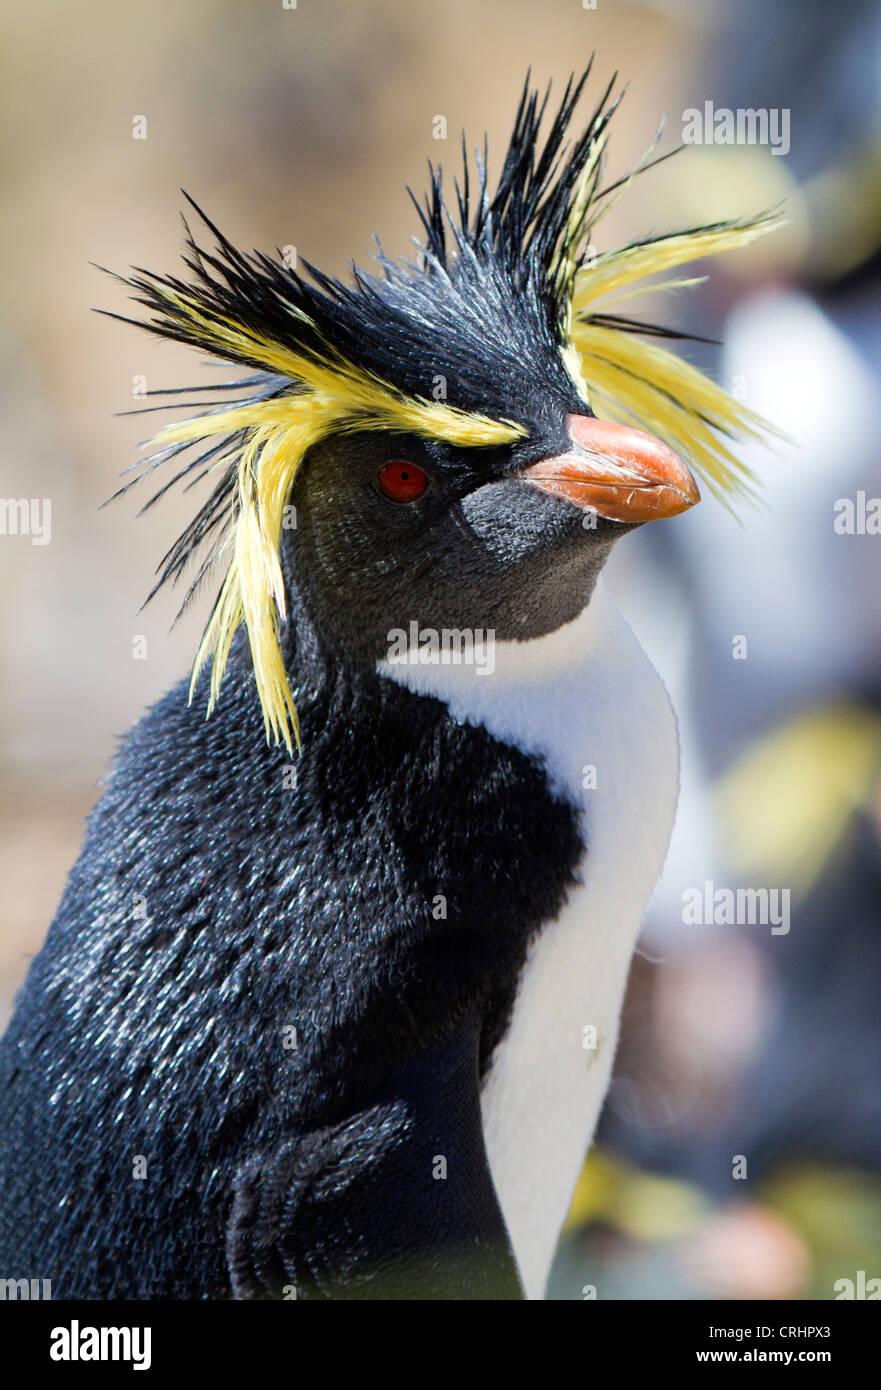 Northern or Long-crested Rockhopper Penguin in the sunlight on Nightingale Island, South Atlantic Ocean Stock Photo